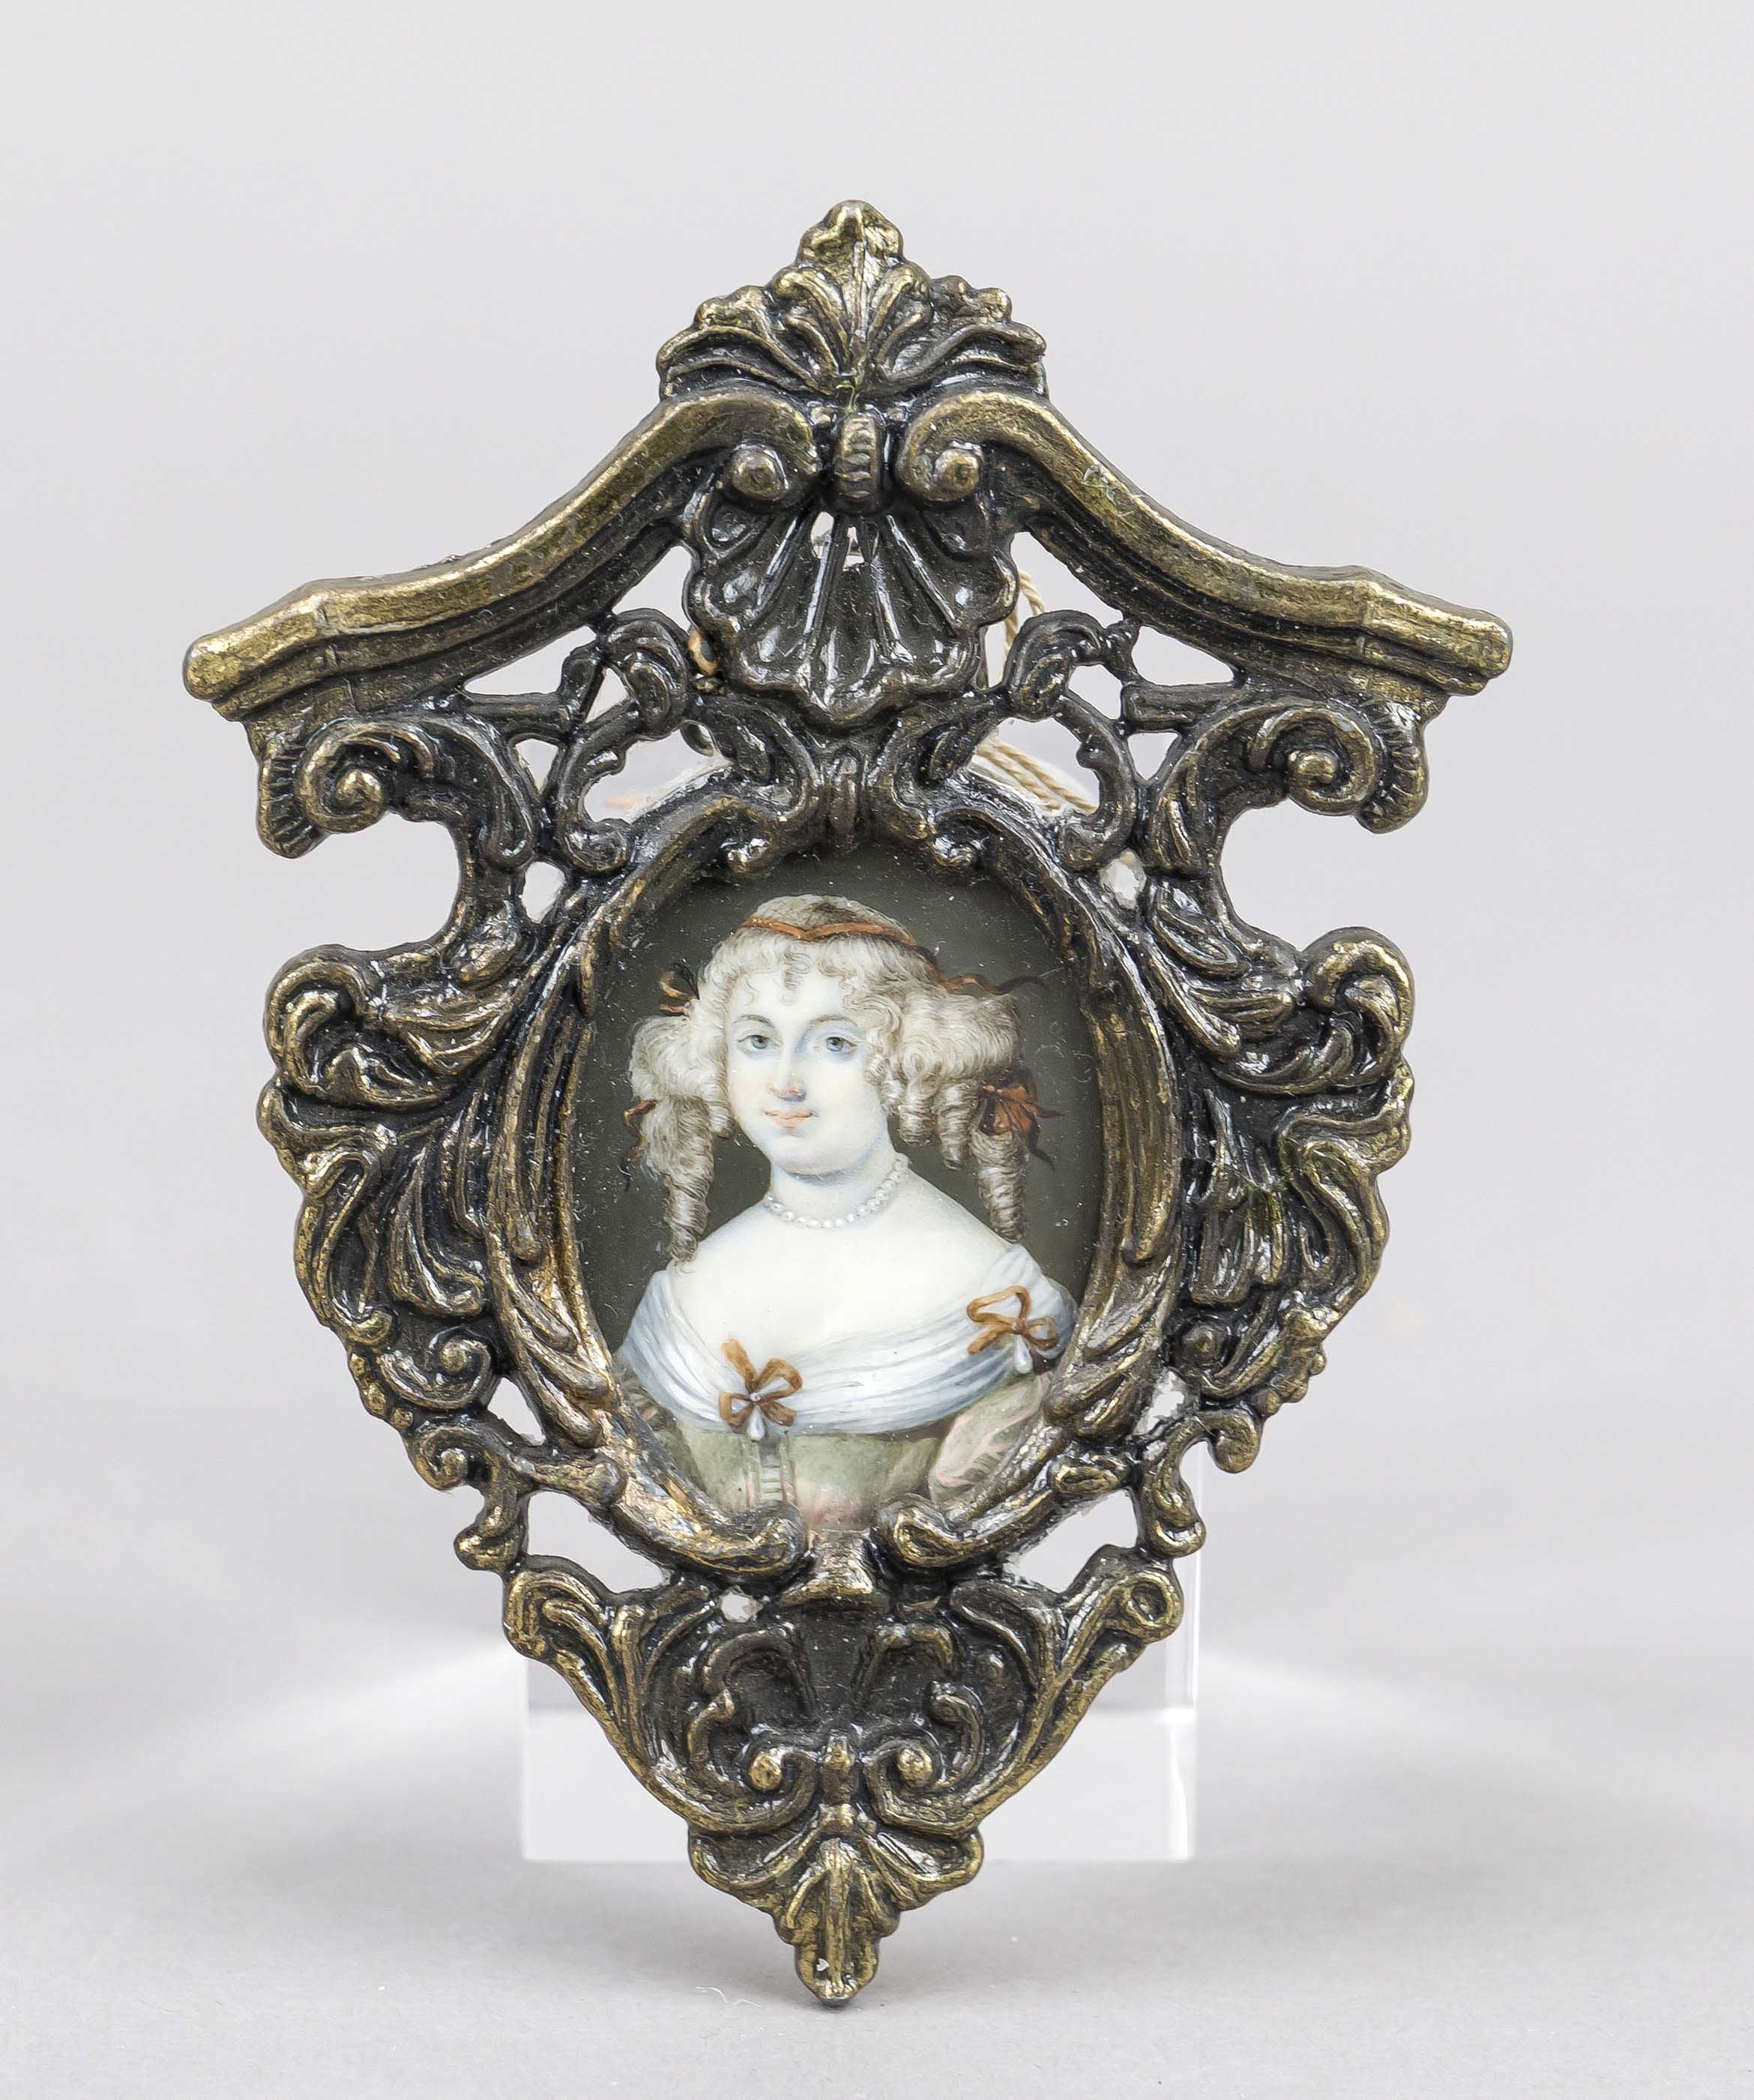 Small oval miniature, 19th century, polychrome tempera painting on bone plate. Marquise de